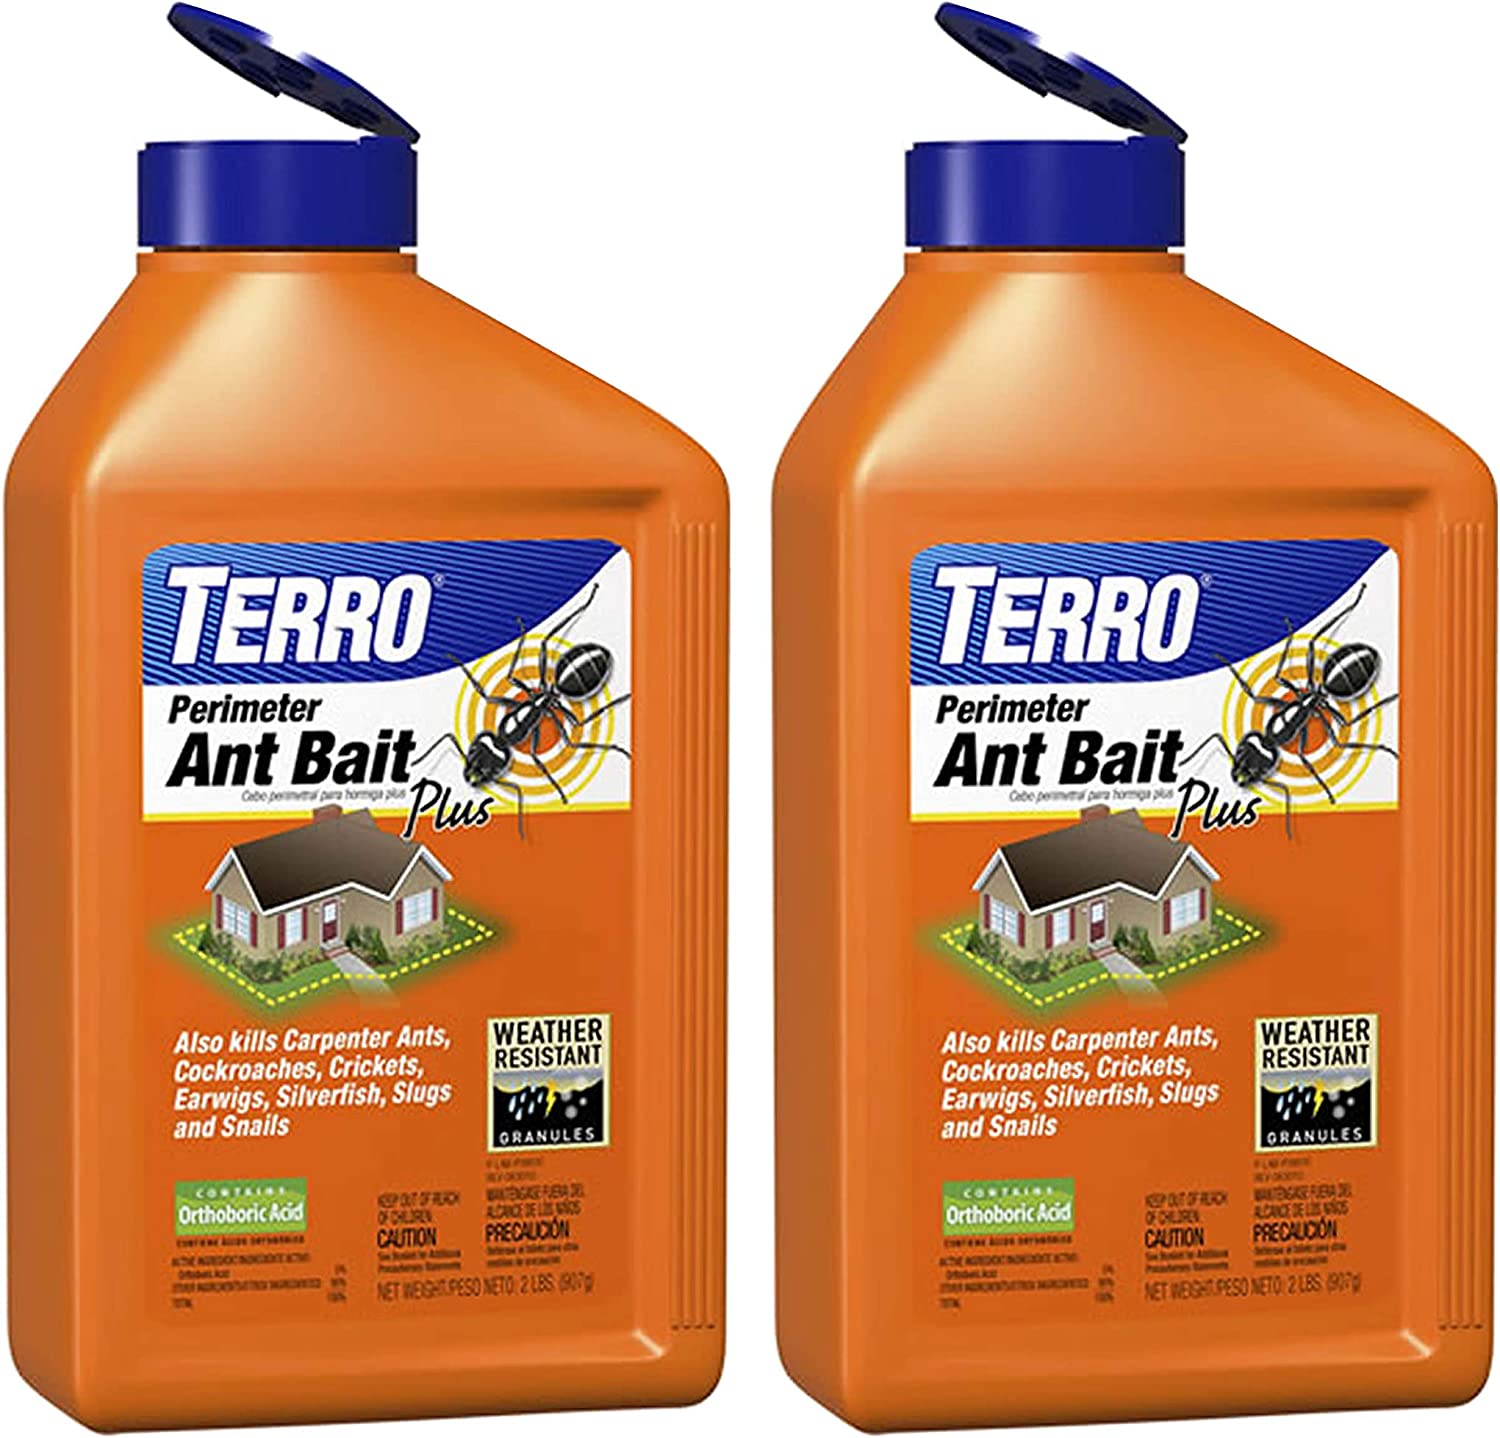 2-Pack 2-lbs Terro Perimeter Ant Bait Plus $17.10 + Free Shipping w/ Prime or on $25+